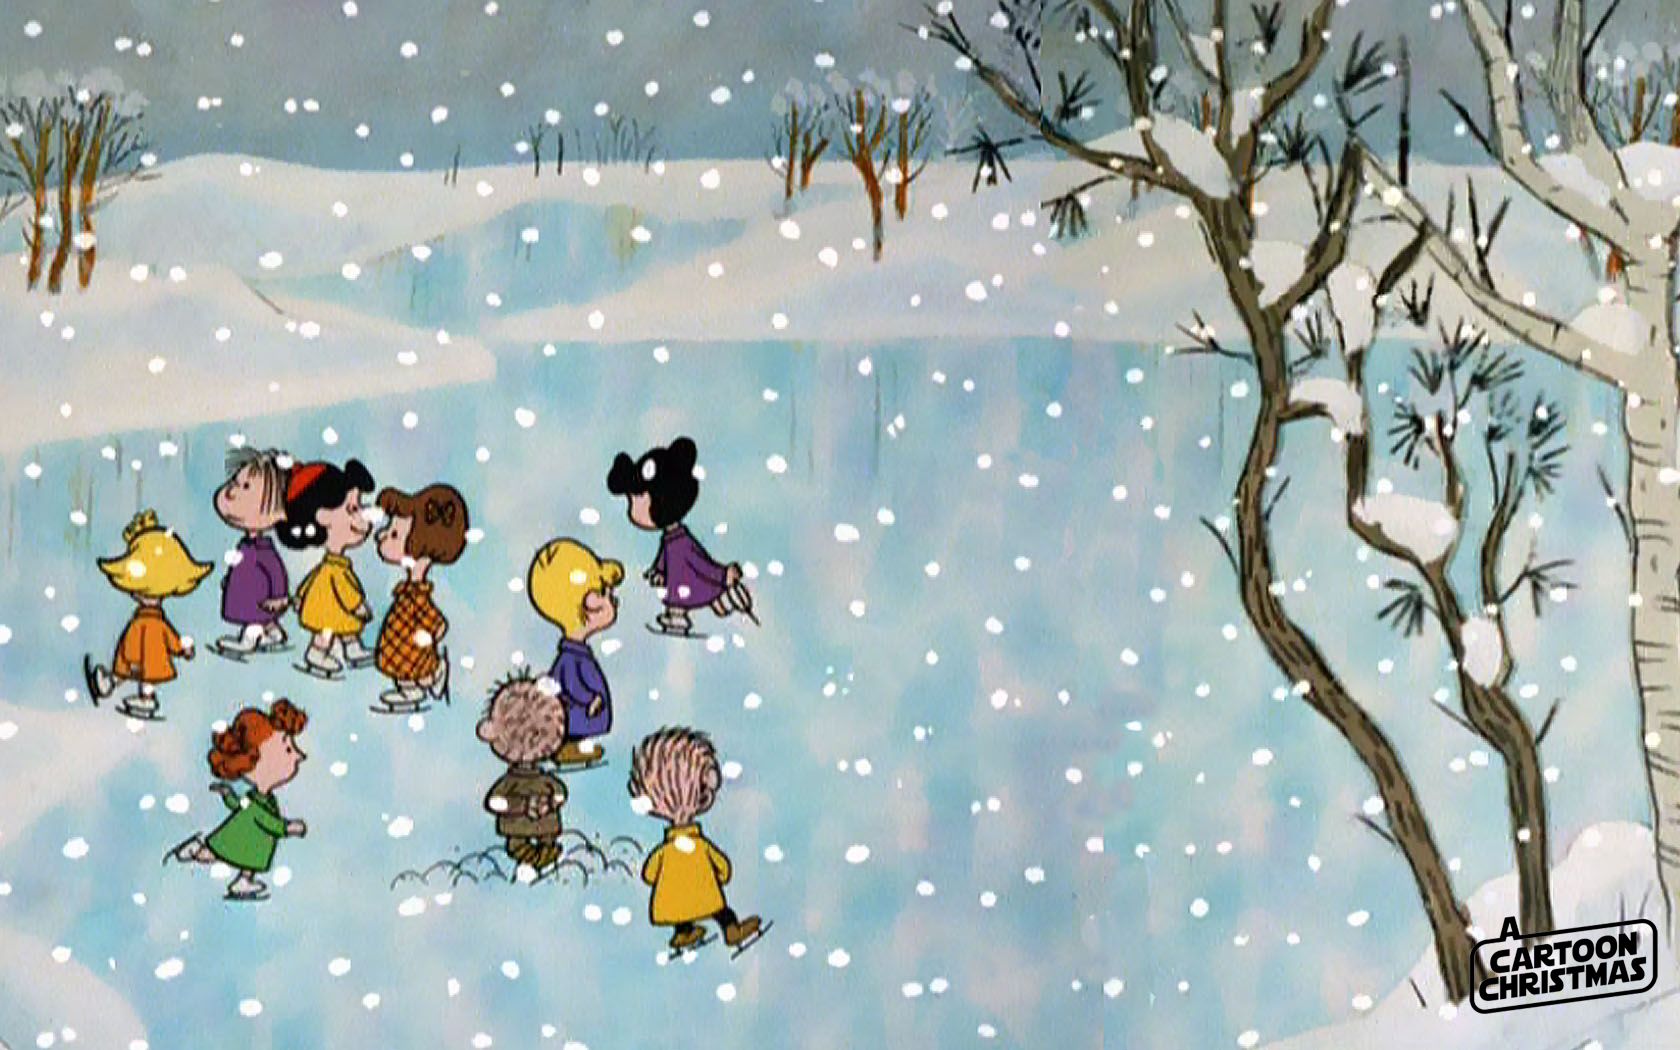 Free download Charlie Brown Wallpaper and Screensaver submited image [1680x1050] for your Desktop, Mobile & Tablet. Explore Peanuts Christmas Wallpaper. Charlie Brown Wallpaper, Free Peanuts and